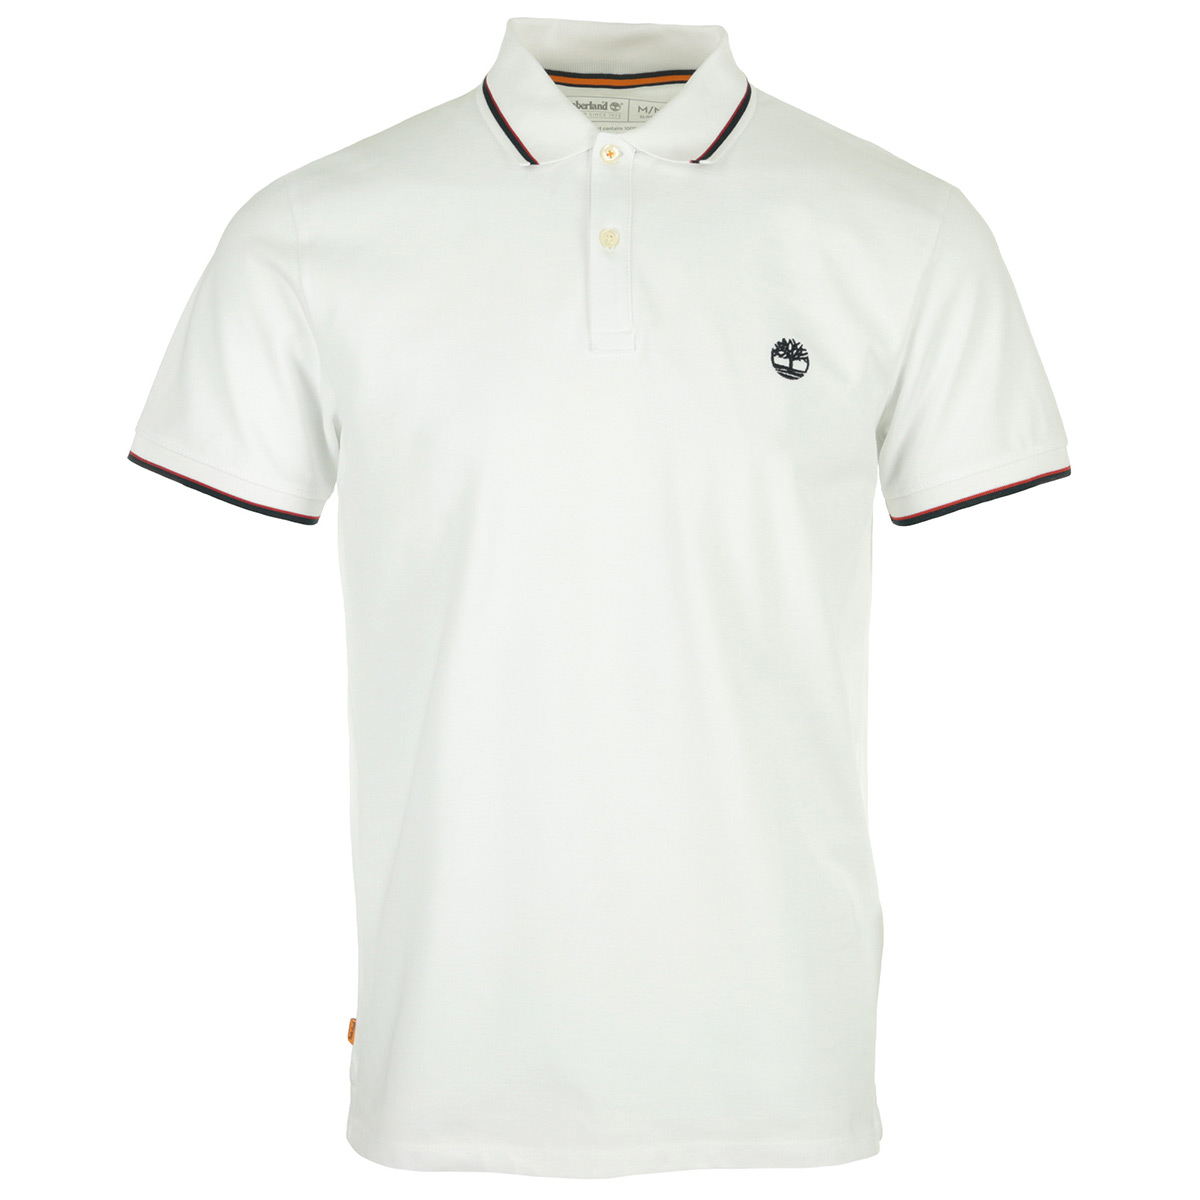 Timberland Millers River Polo